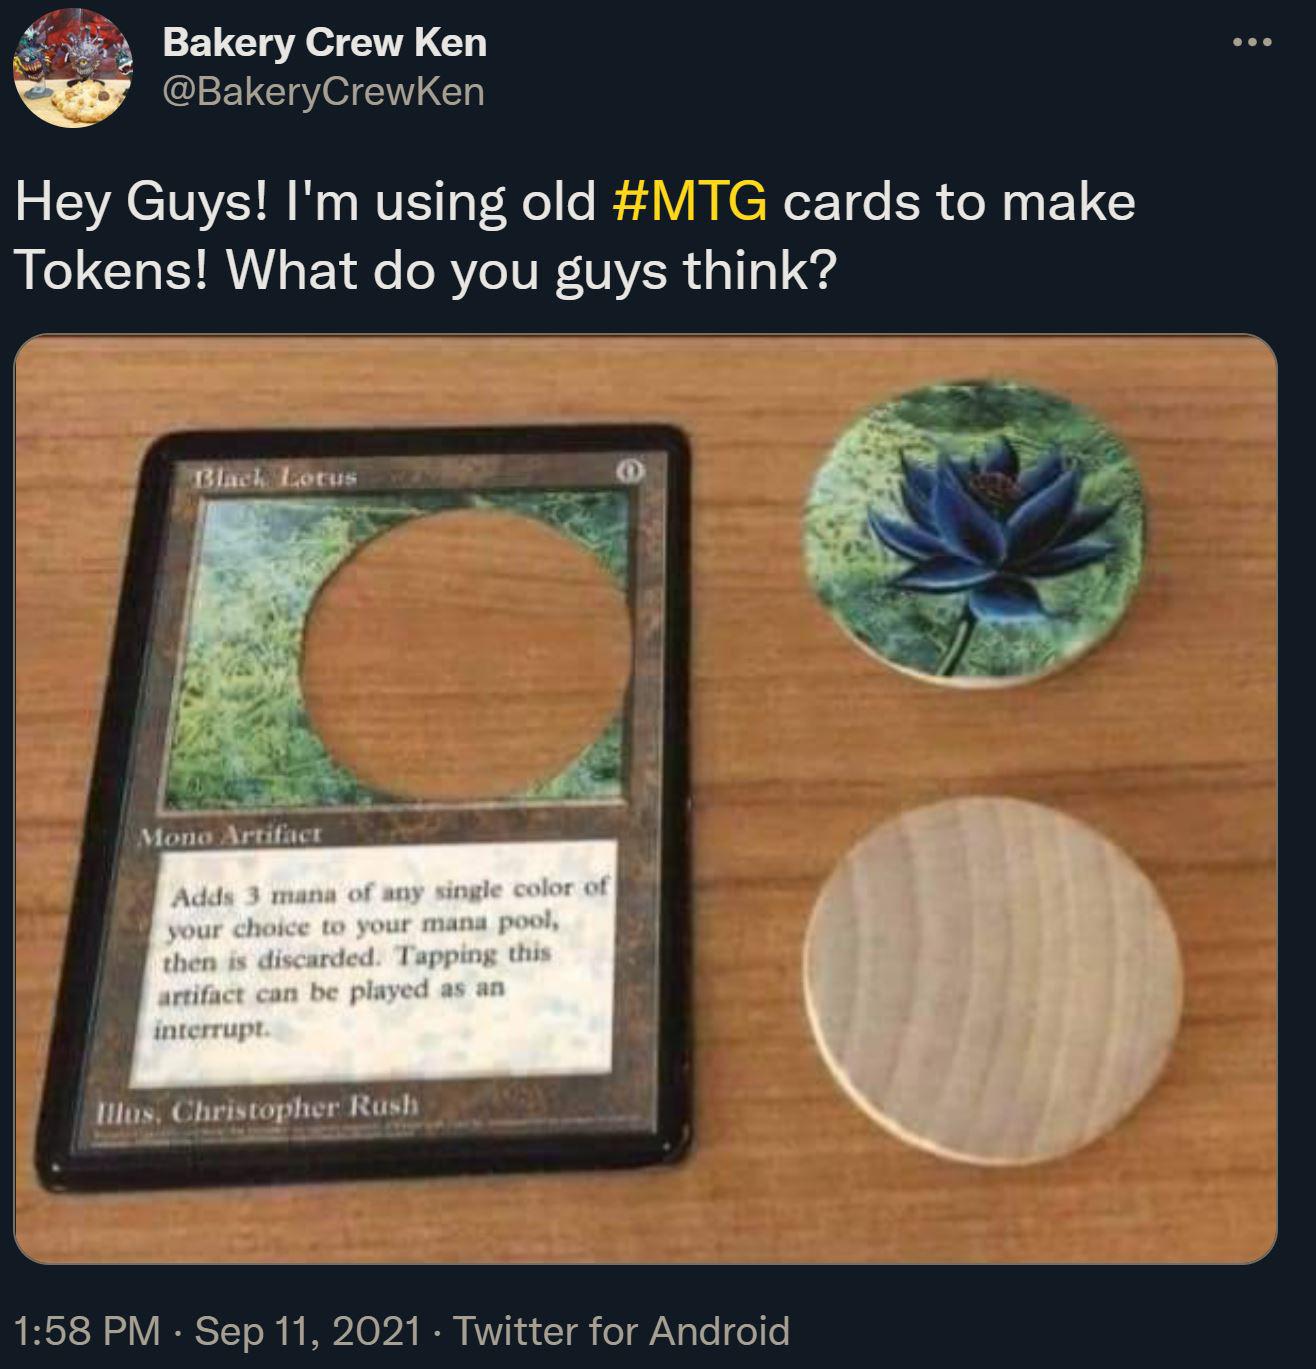 cringe pics - wtf pics - magic the gathering black lotus - O Bakery Crew Ken Hey Guys! I'm using old cards to make Tokens! What do you guys think? Black Lotus Mono Artifact Adds 3 mana of any single color of your choice to your mana pool, then is discarde